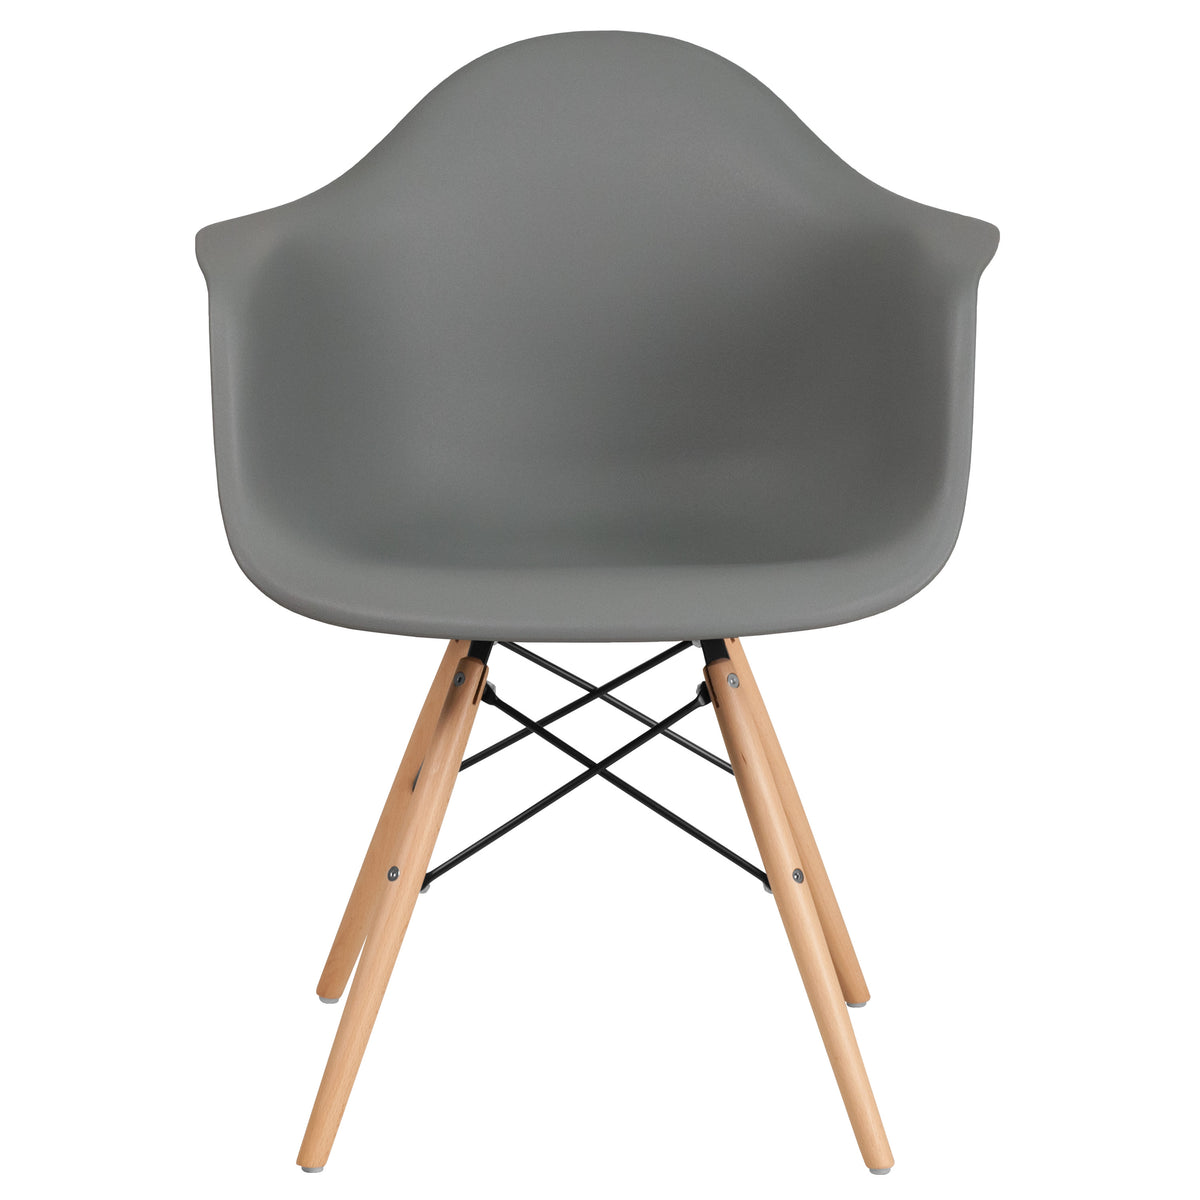 Moss Gray |#| Moss Gray Plastic Chair with Arms and Wooden Legs - Accent & Side Chair